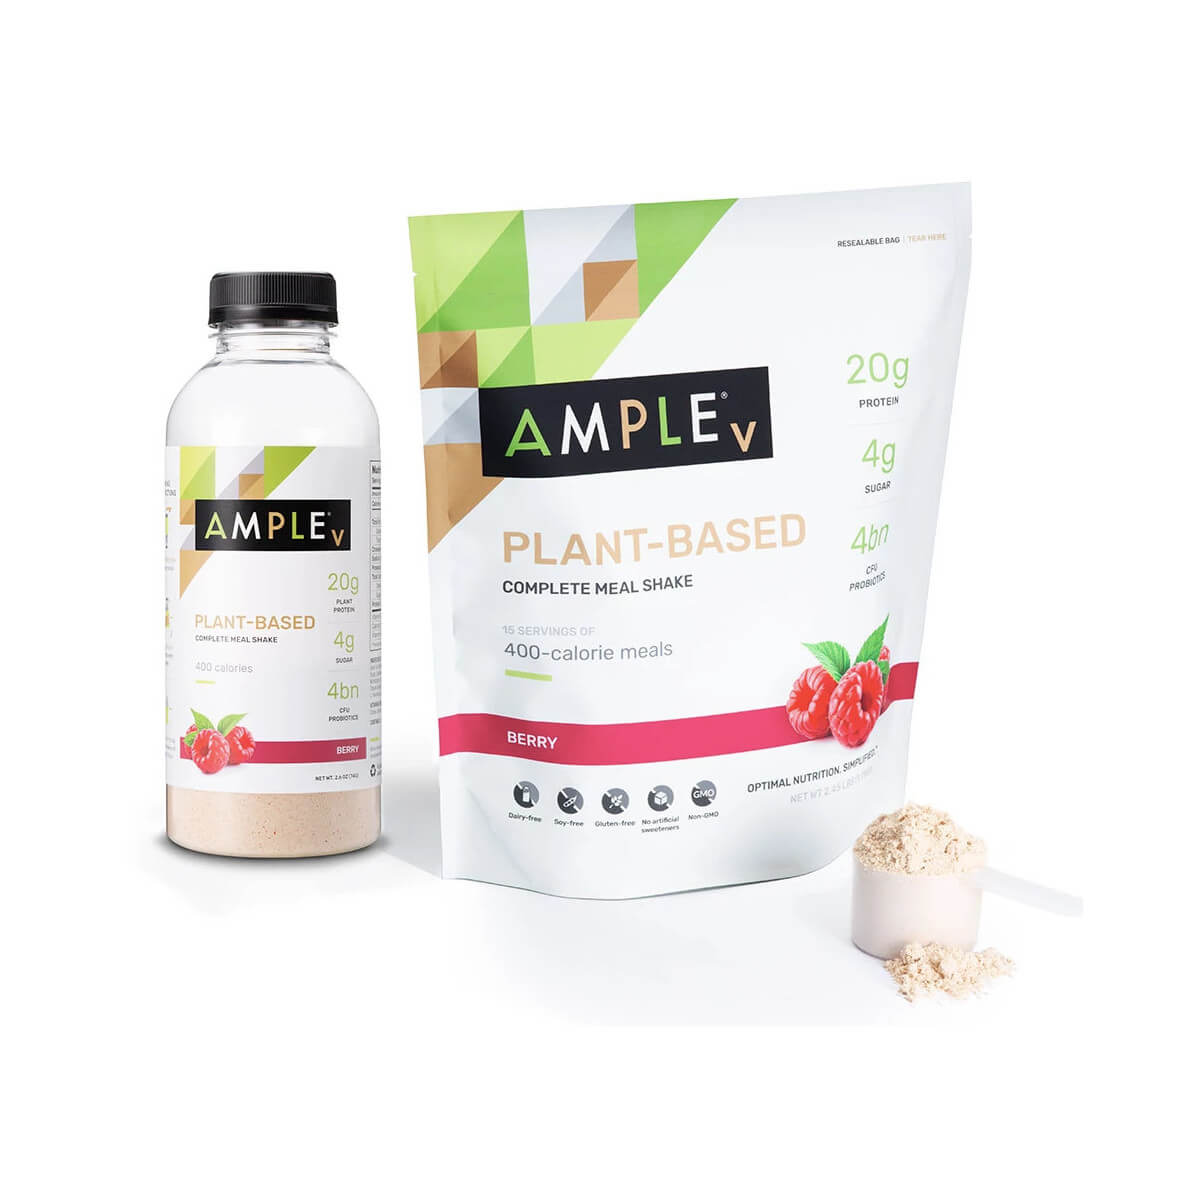 Ample V product image